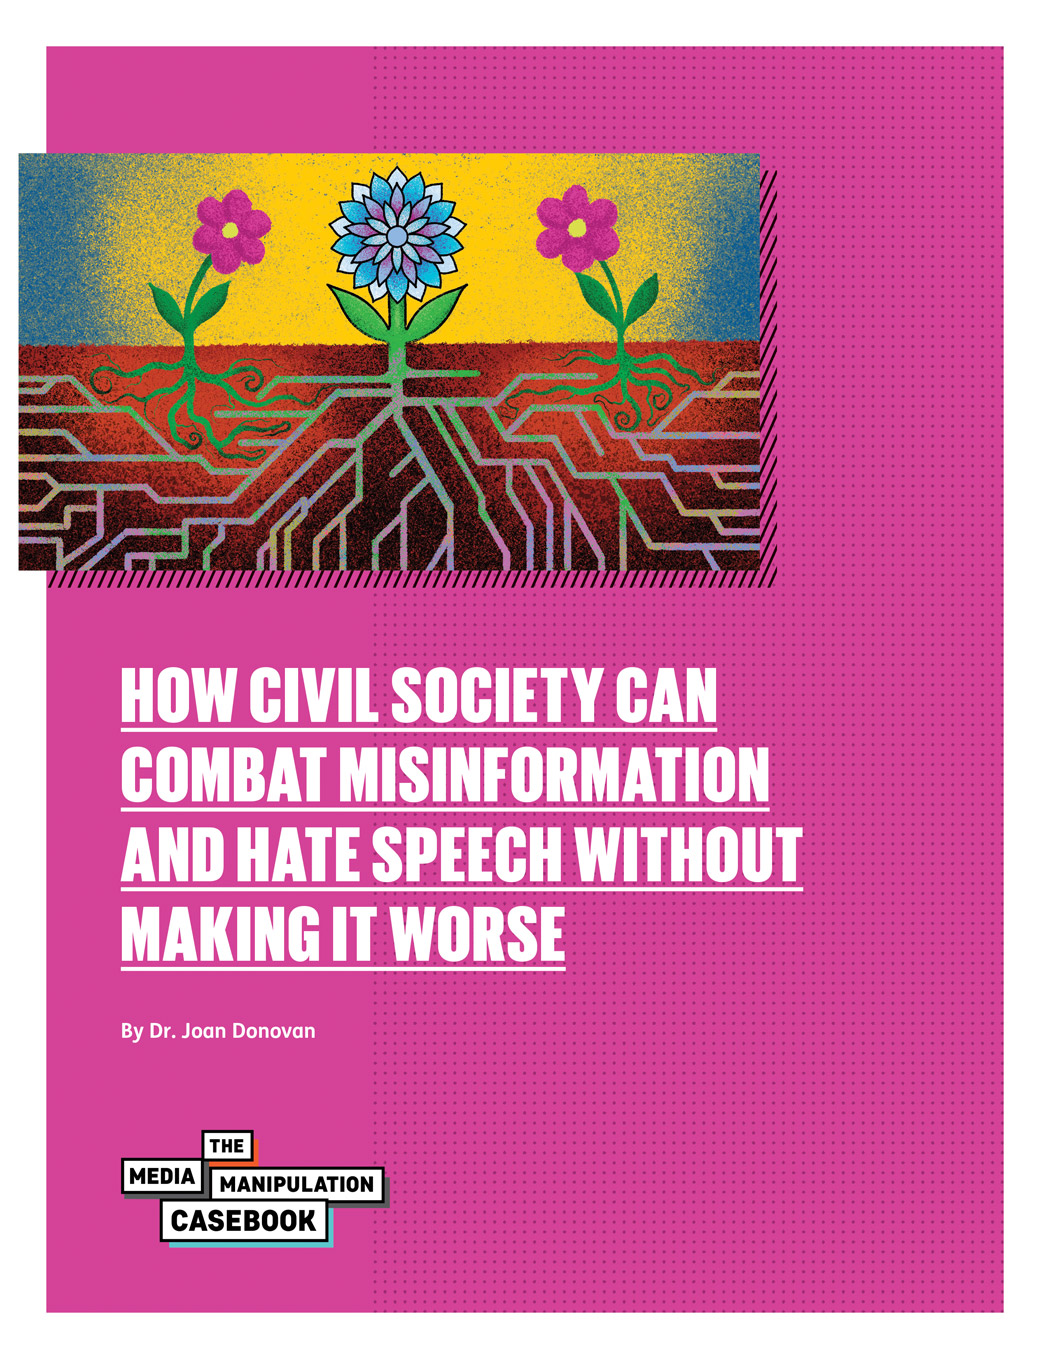 Download the tip sheet on how civil society can combat misinformation and hate speech